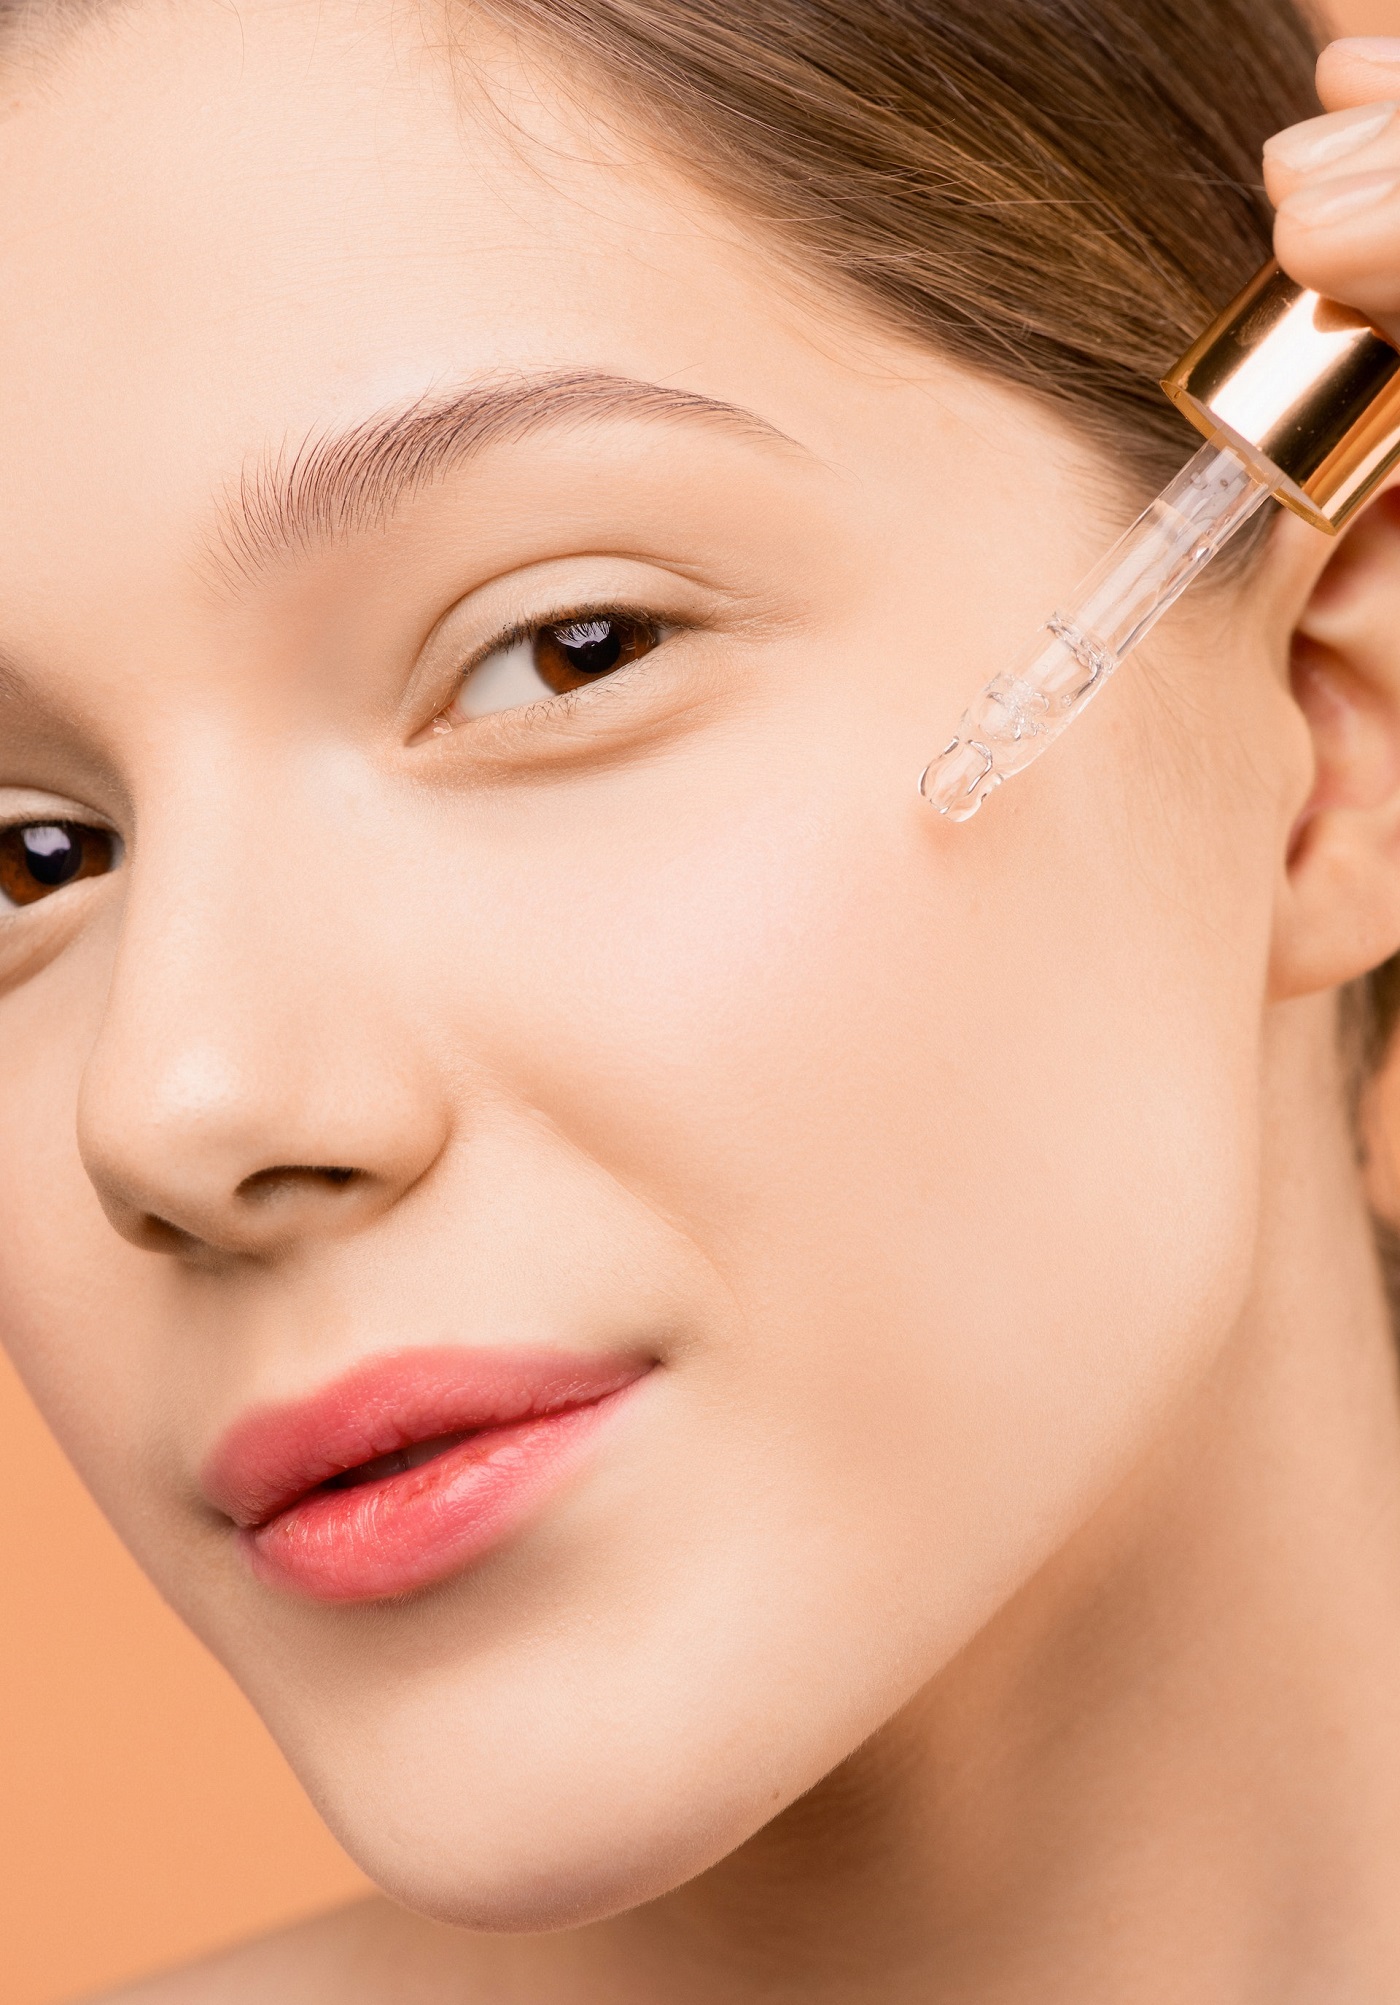 Top 10 Serums for Glowing Skin in India